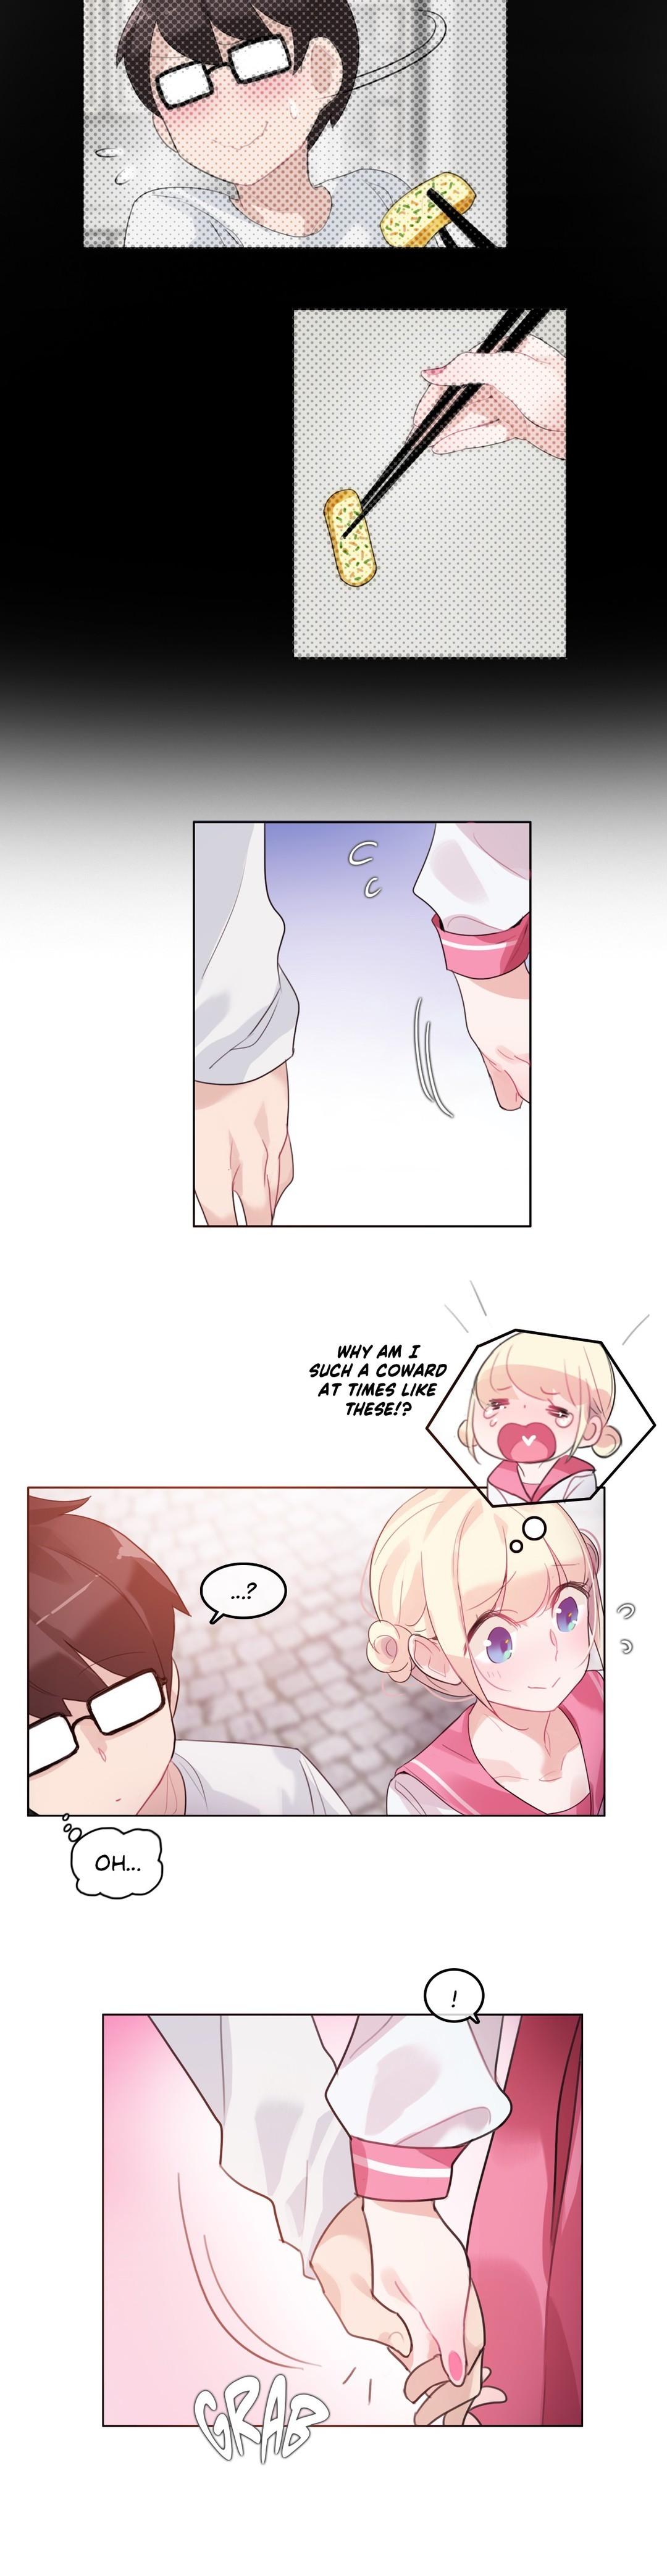 A Pervert's Daily Life Ch. 1-34 649